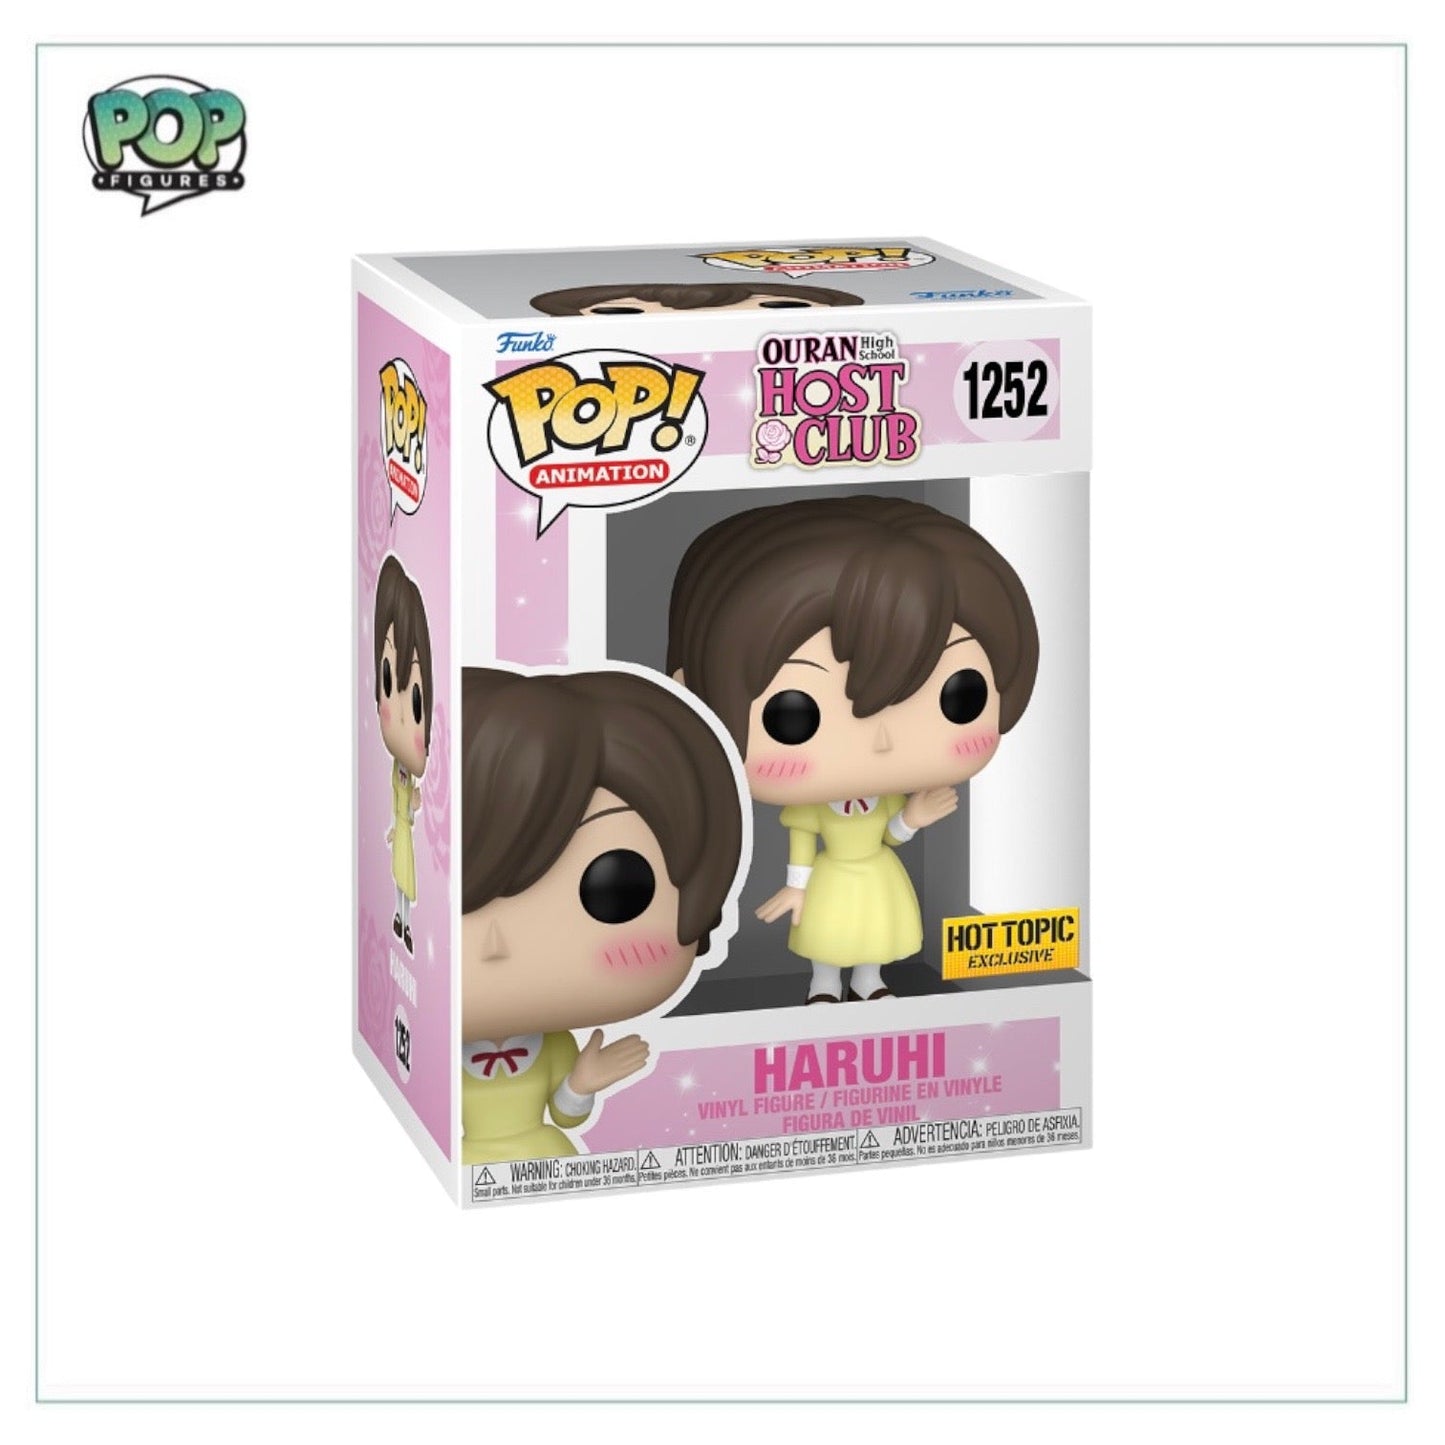 Haruhi #1252 Funko Pop! - Ouran High School Host Club - Hot Topic Exclusive - Angry Cat